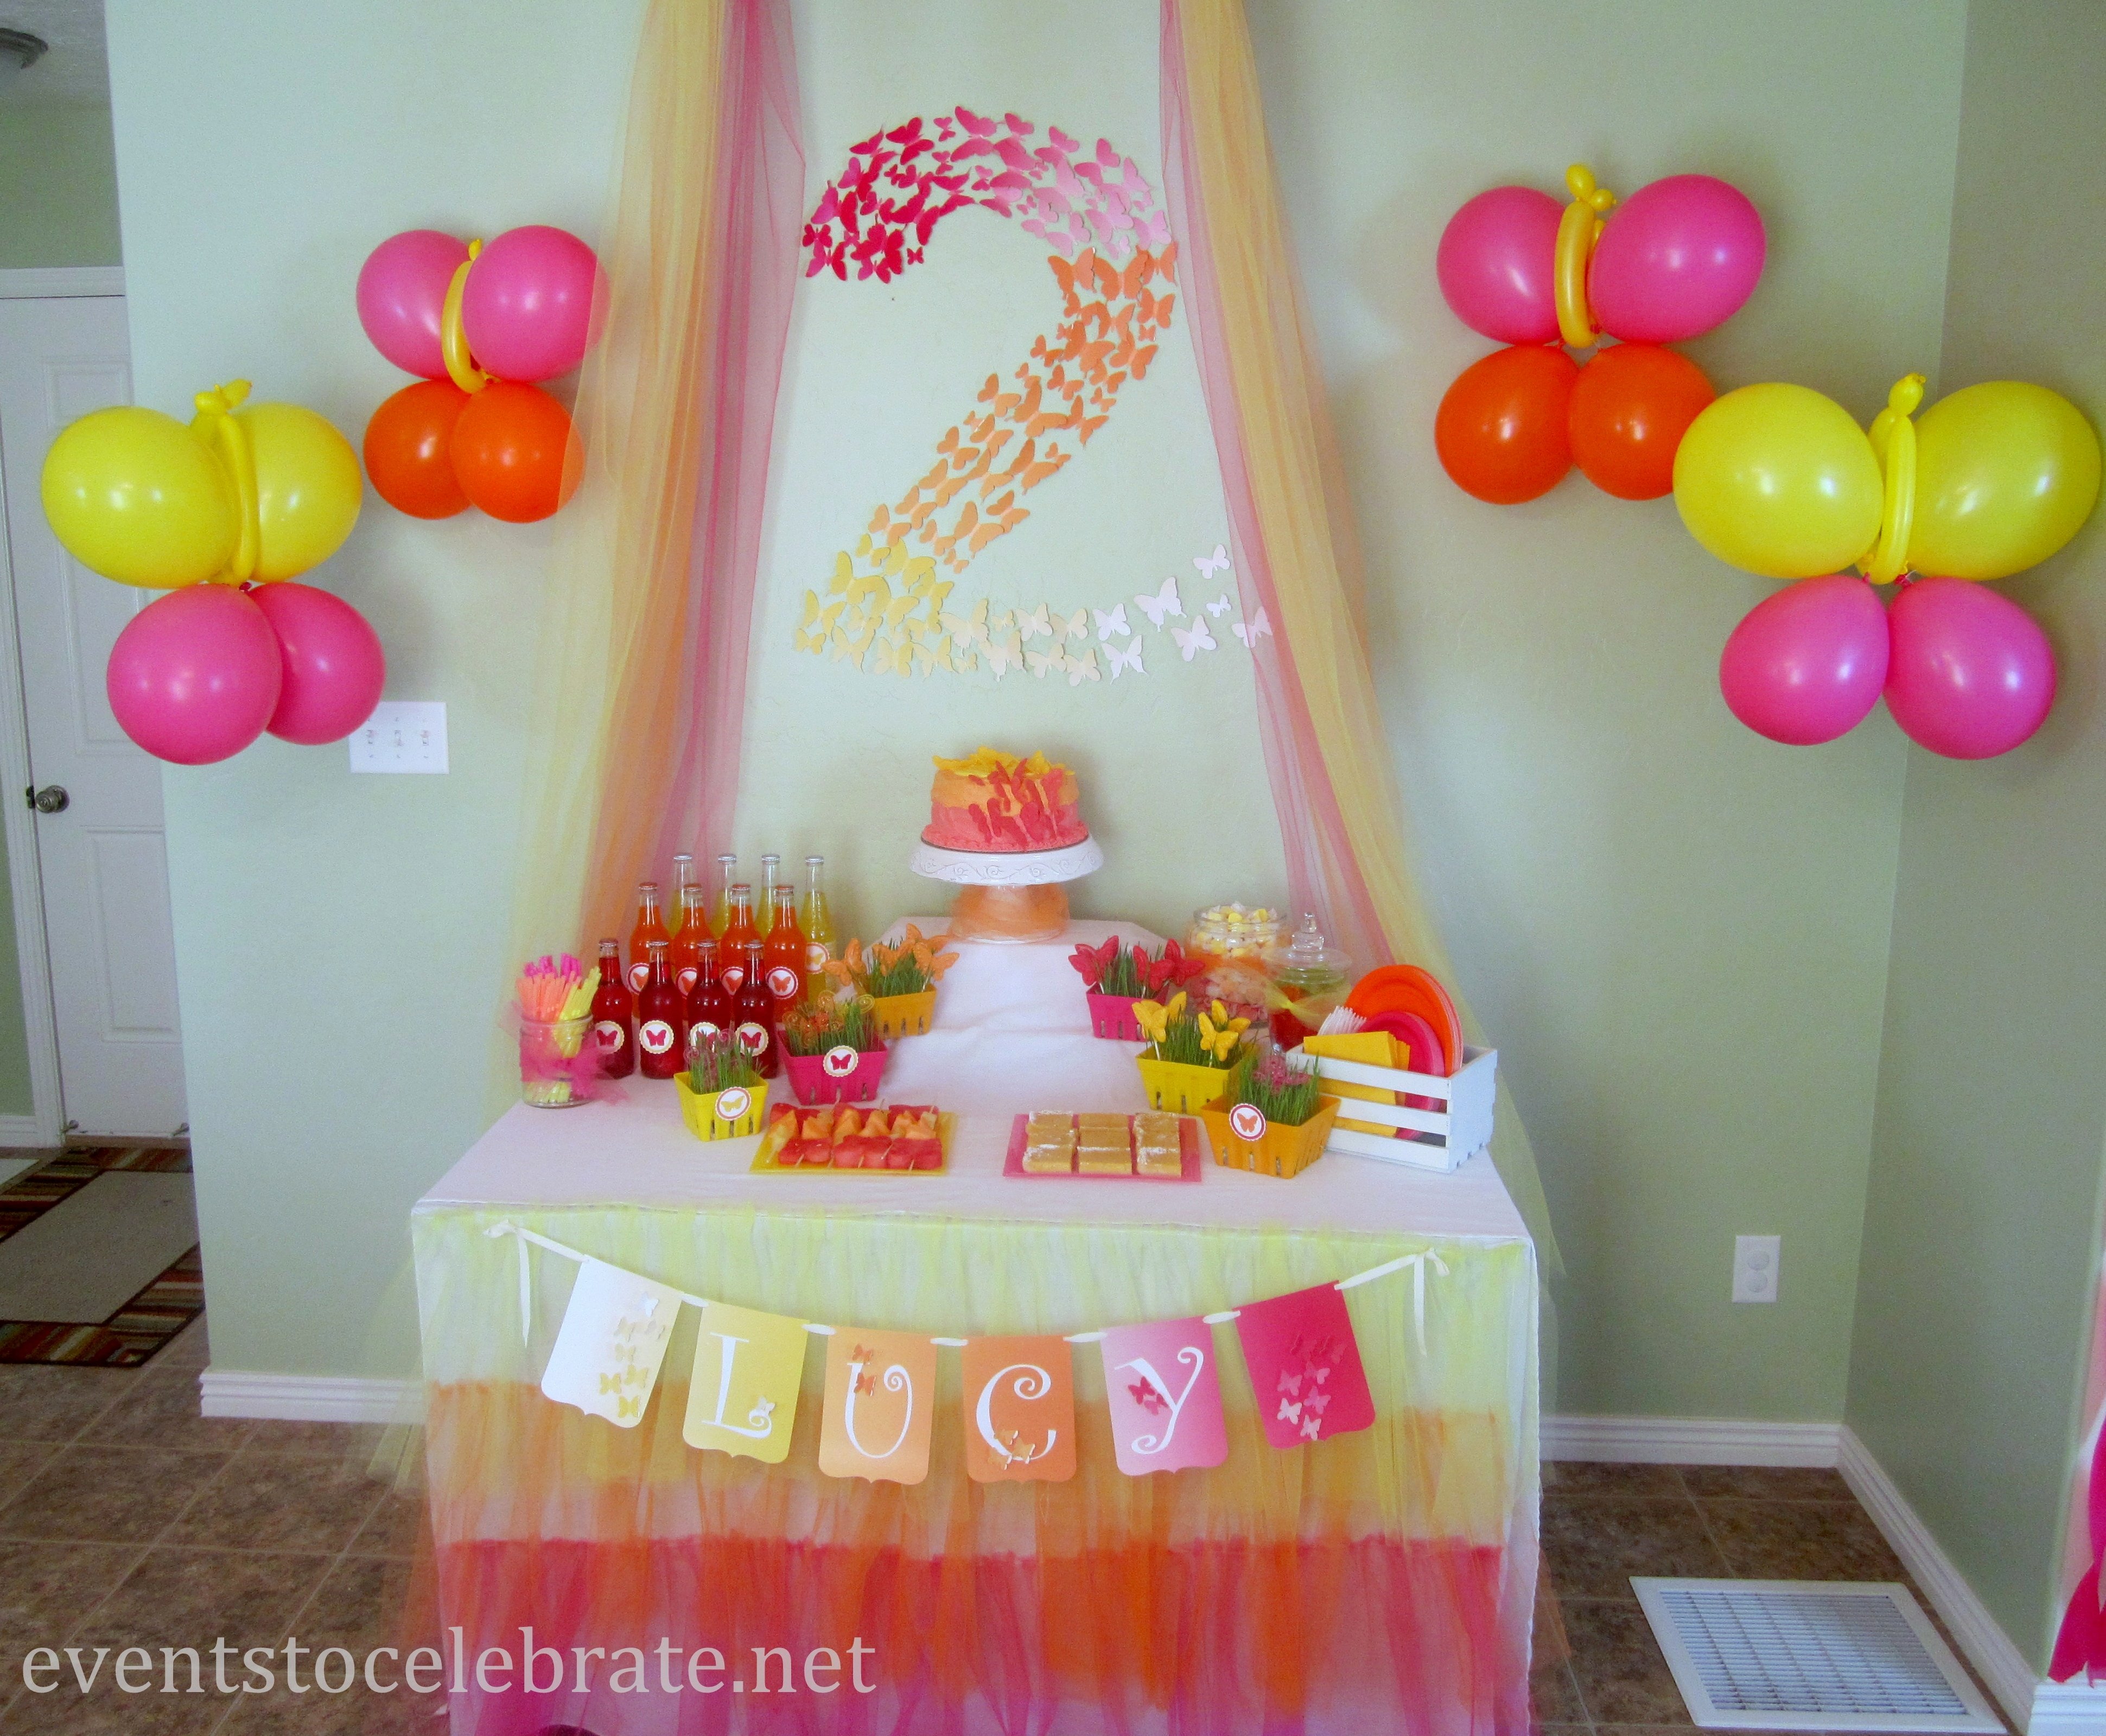 10 Cute Kids Birthday Party Ideas At Home easy birthday decoration ideas at home awesome colorful house kids 2022